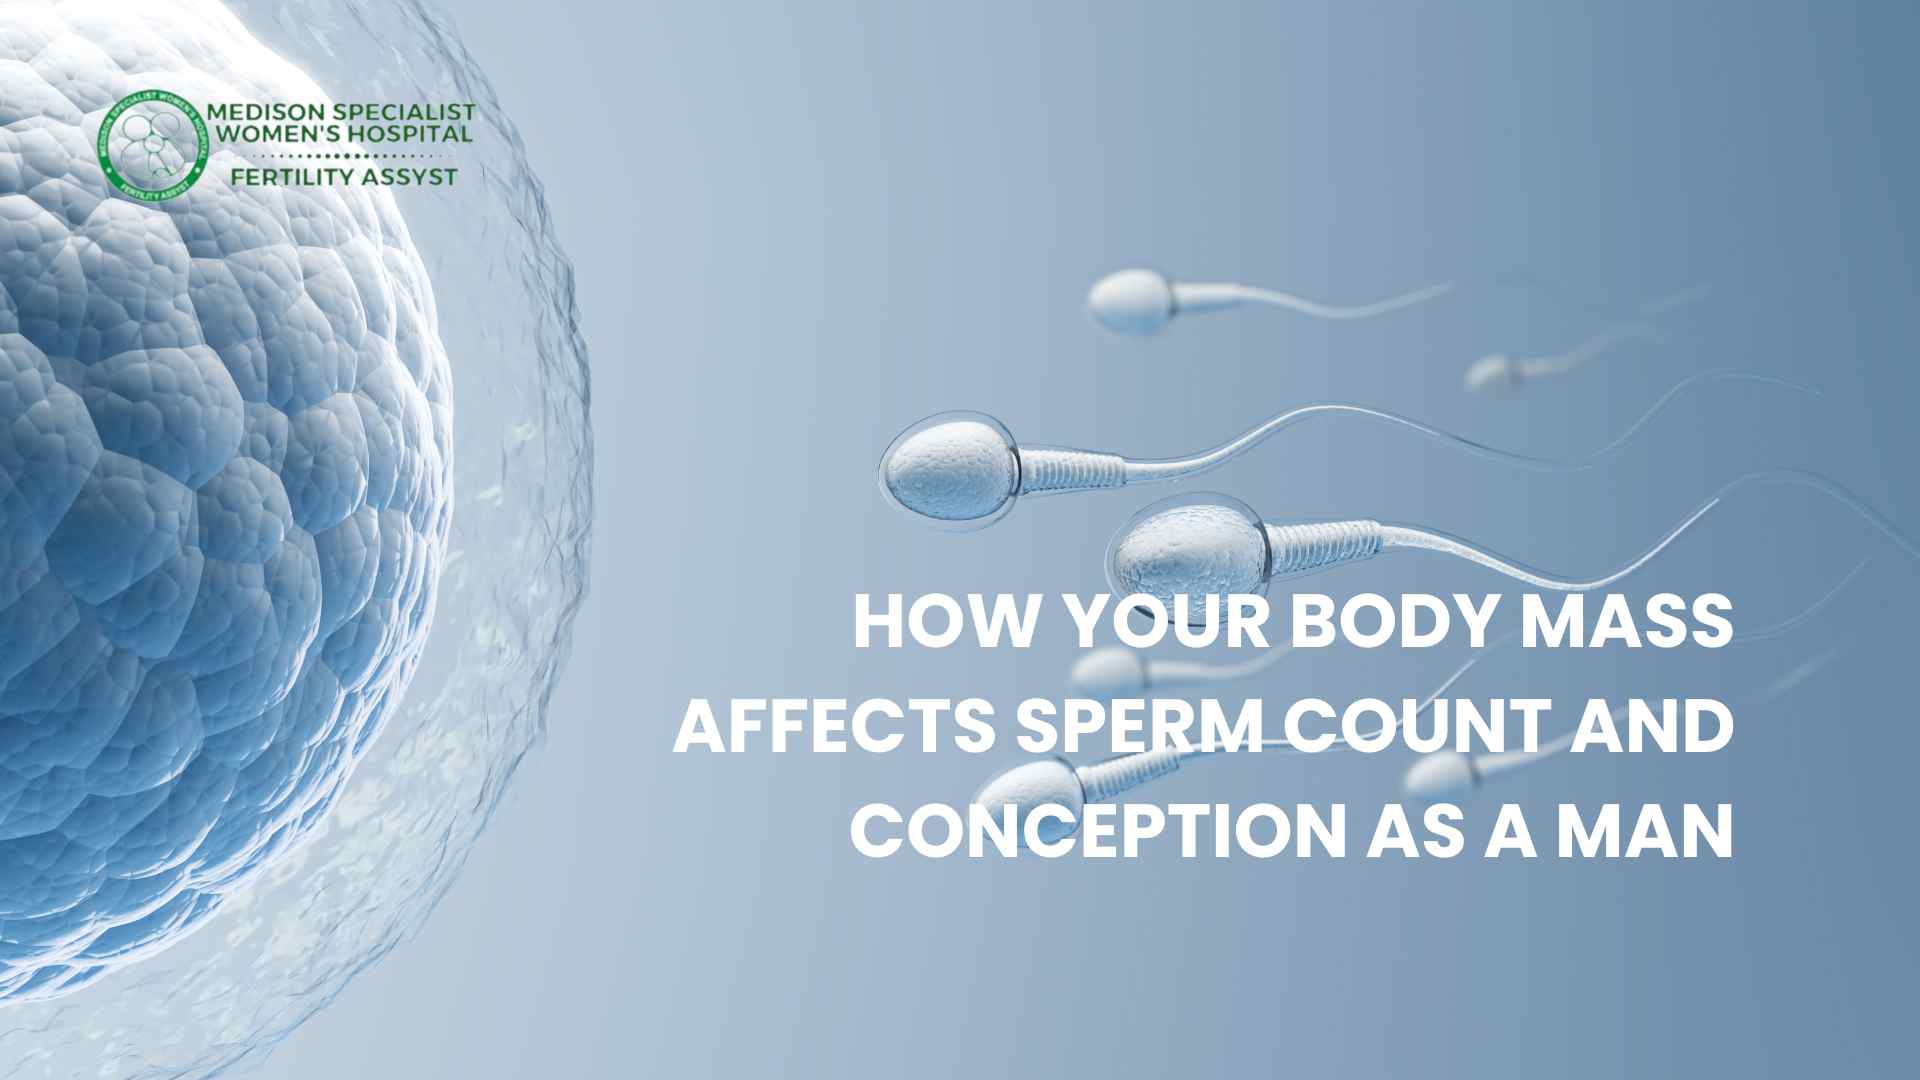 How Your Body Mass Affects Sperm Count and Conception As a Man